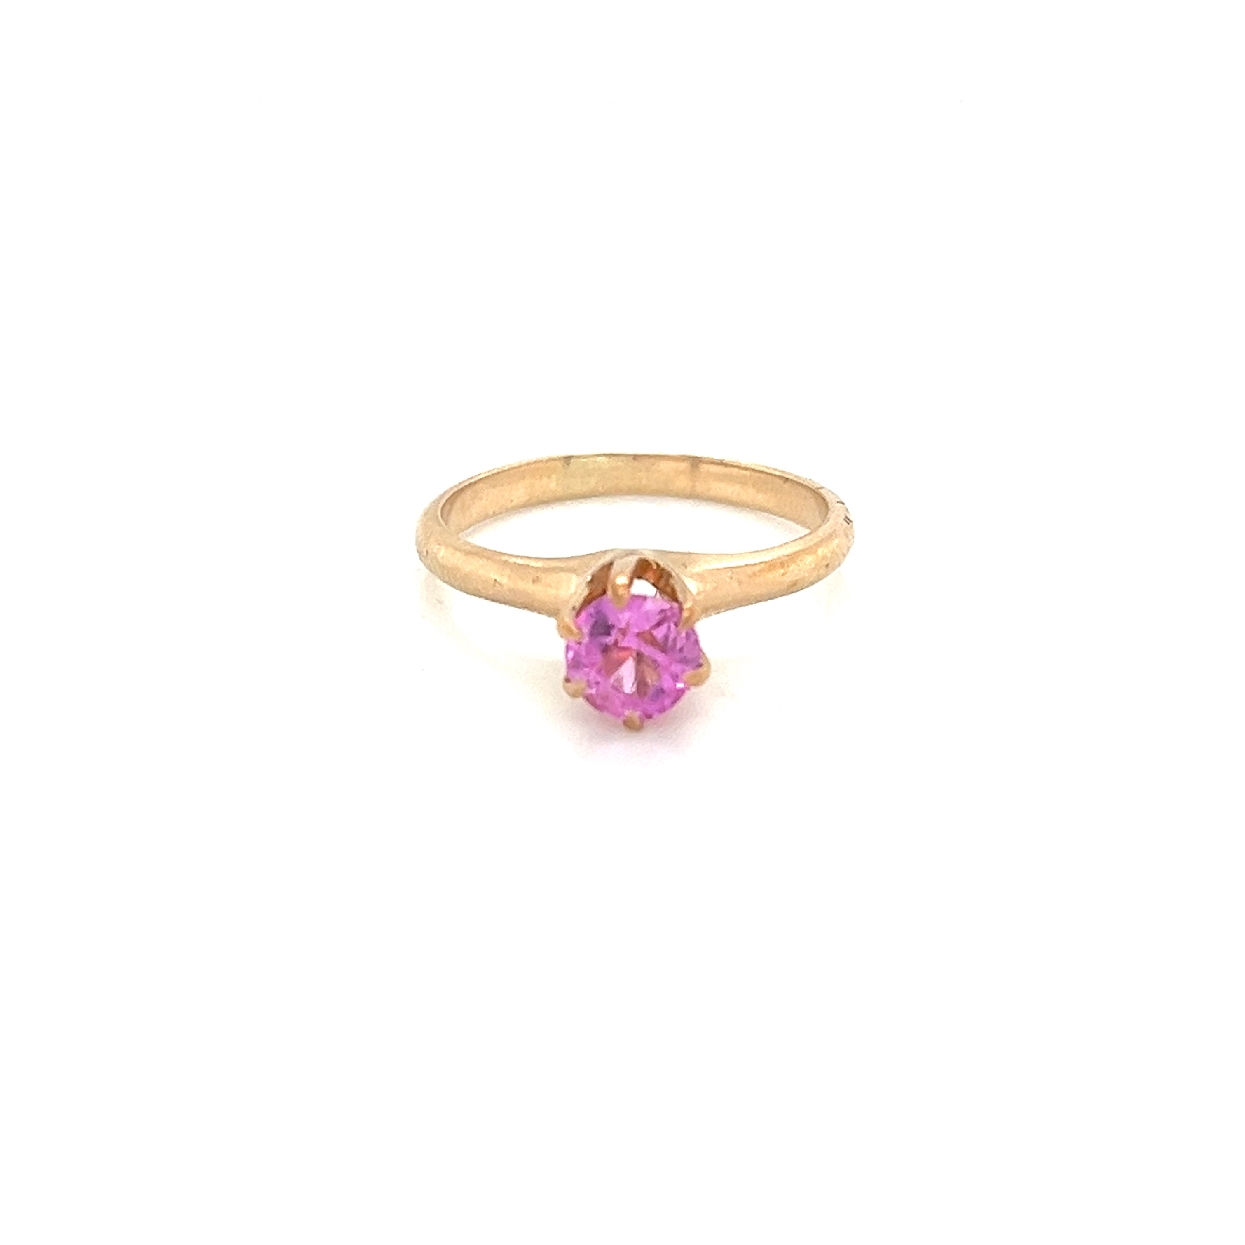 10K Yellow Gold solitare pink topaz size 6 